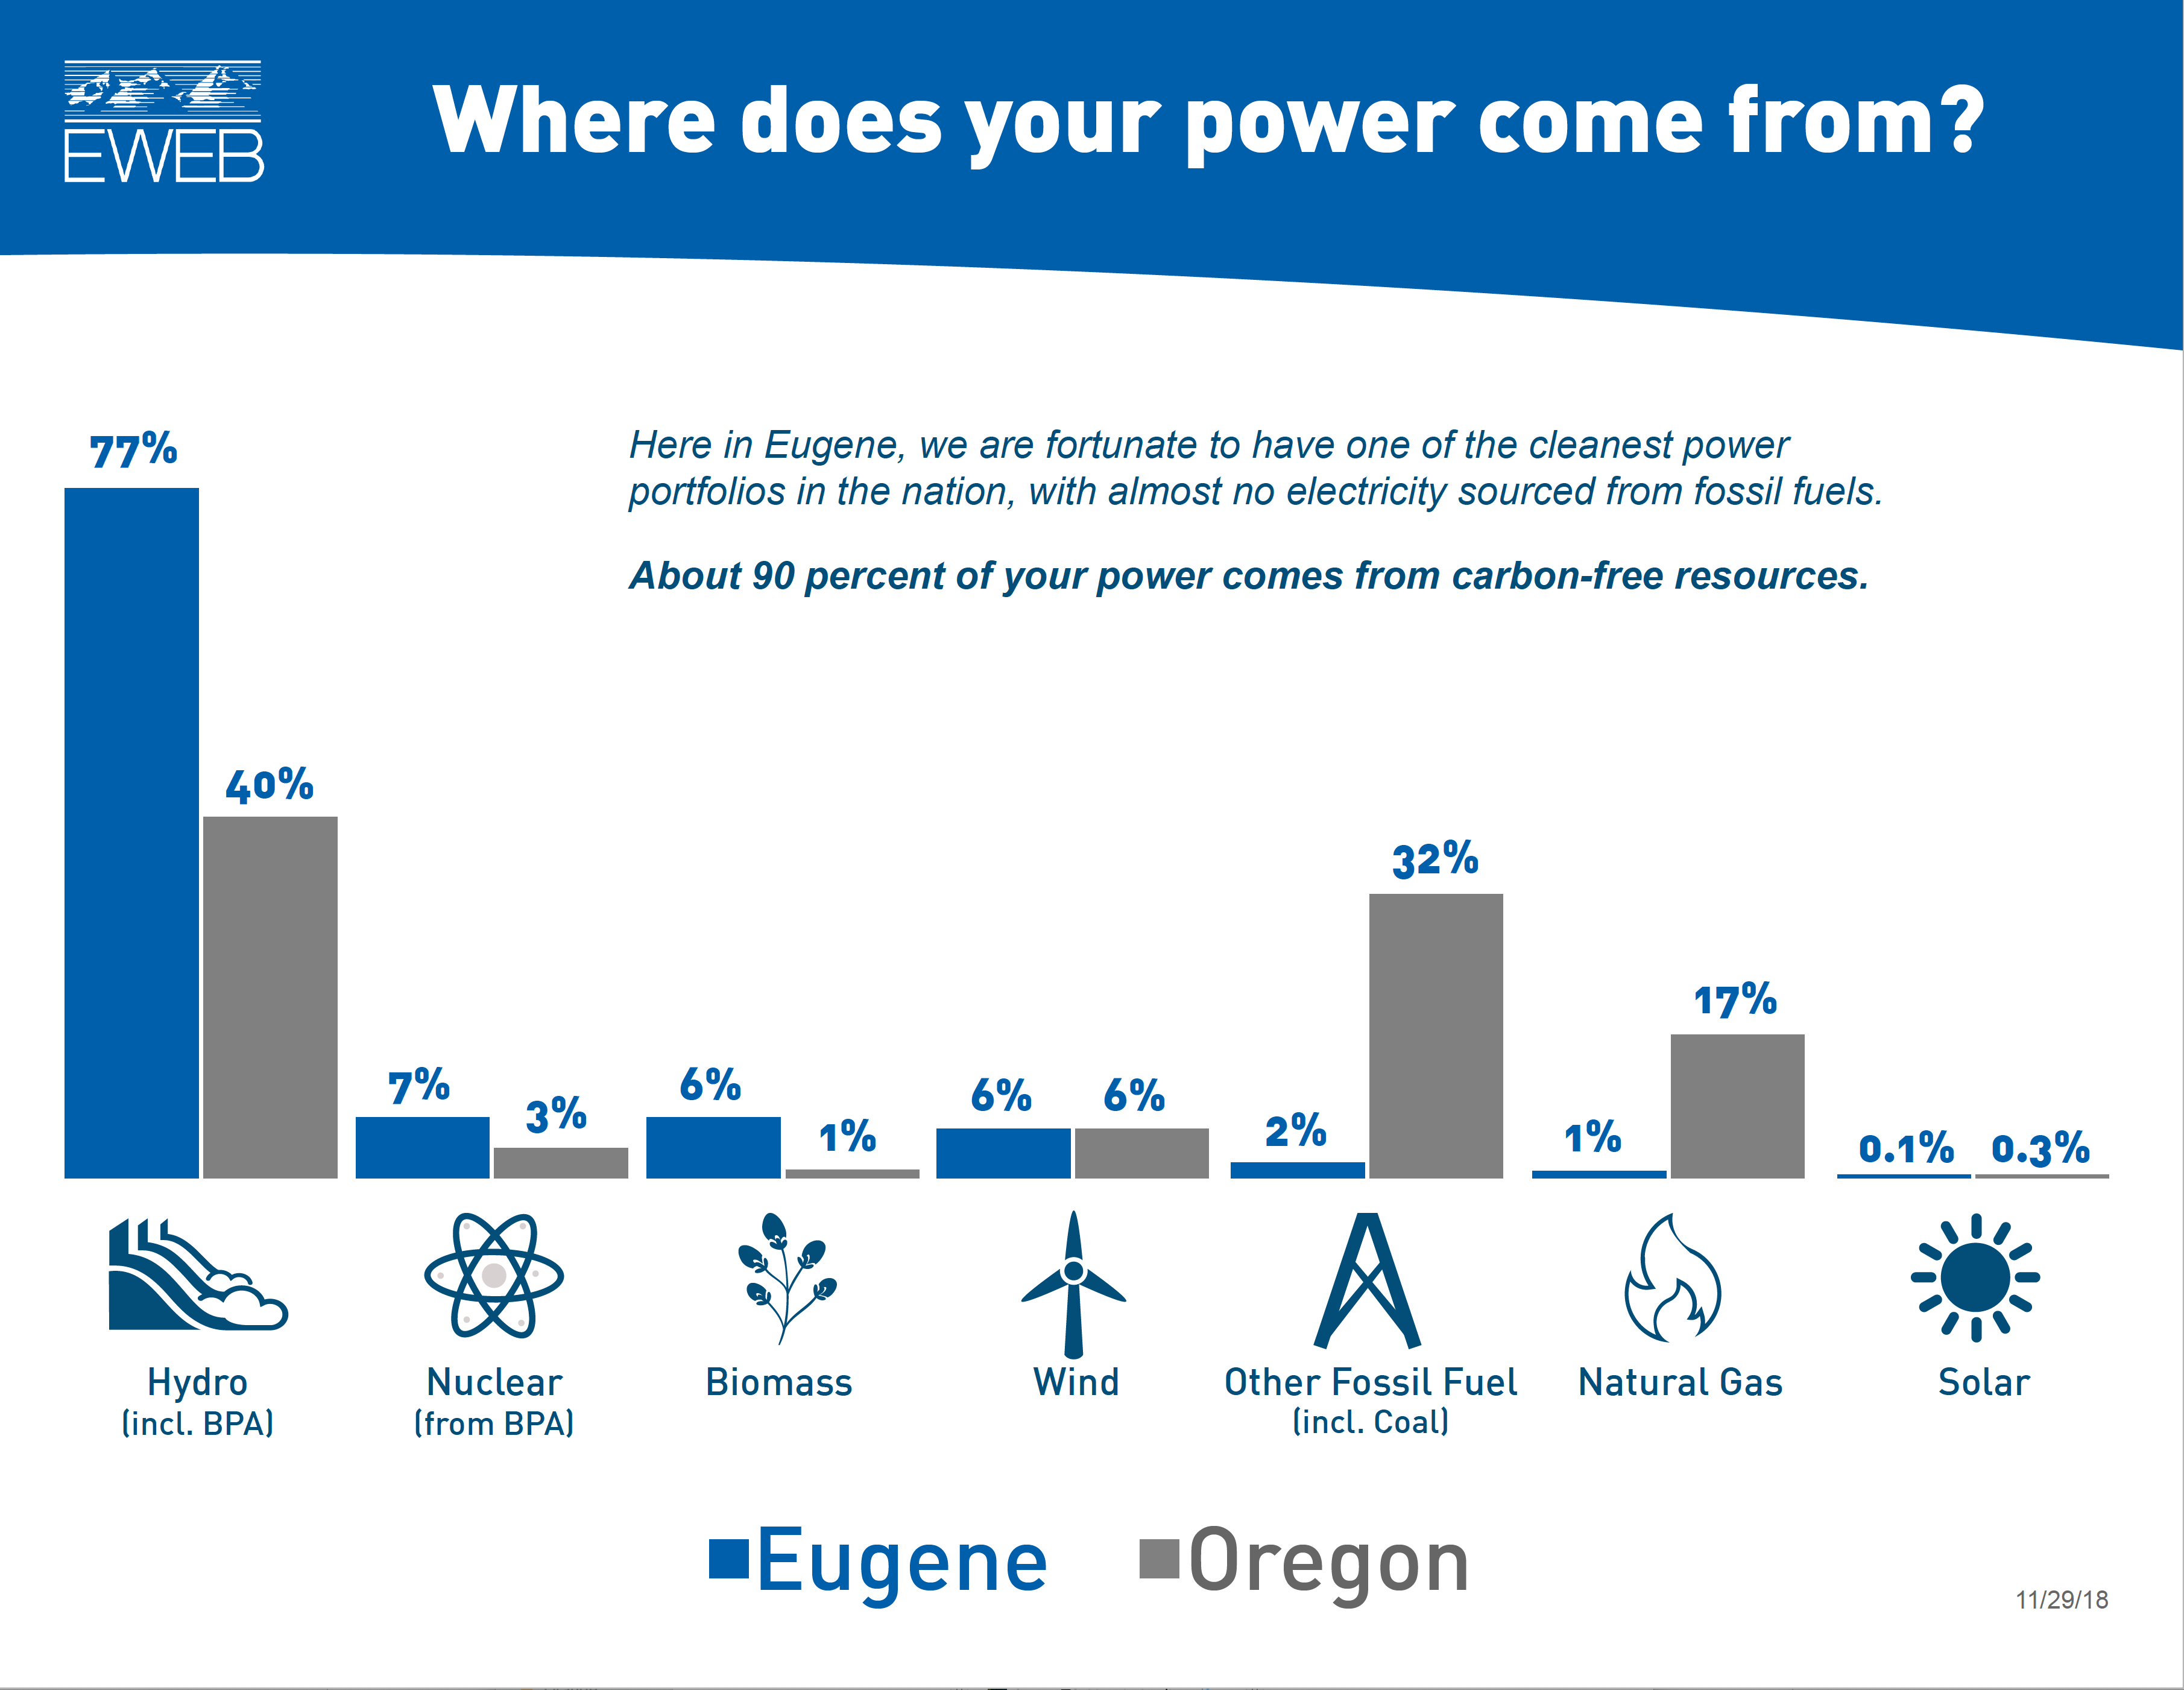 Eugene's electricity is 90% carbon-free